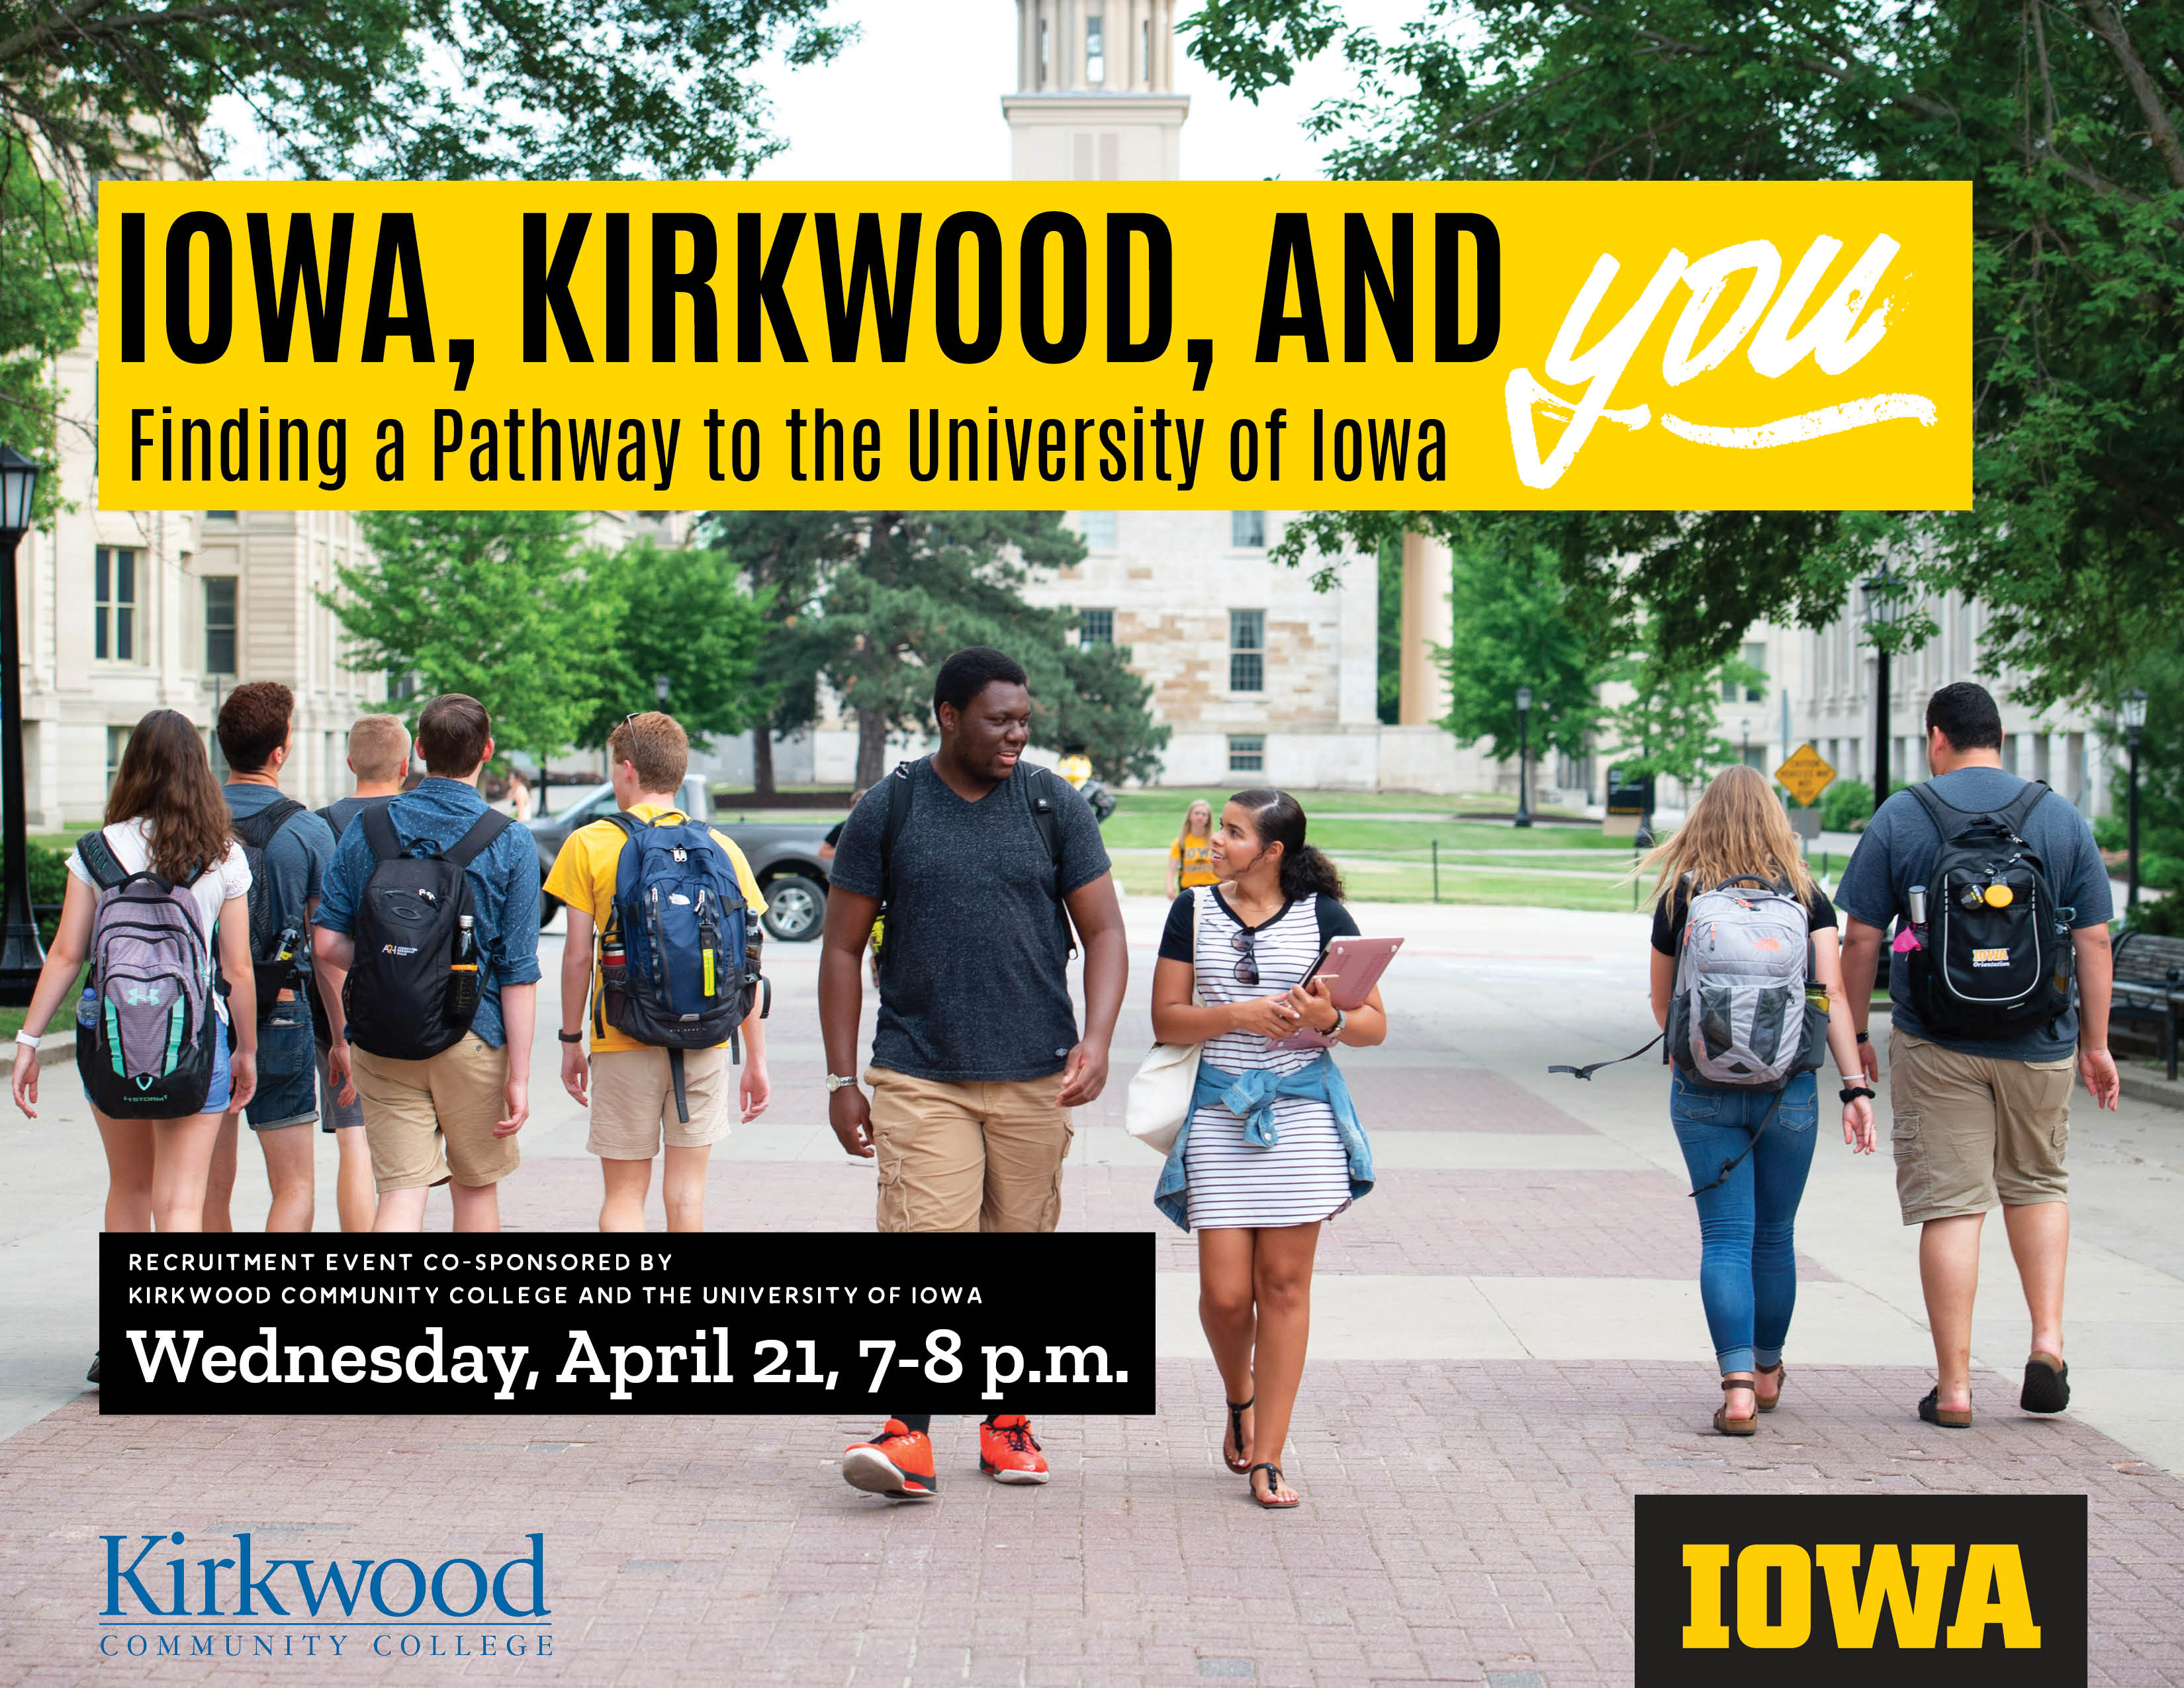 Iowa, Kirkwood and You: Finding a Pathway to the University of Iowa promotional image